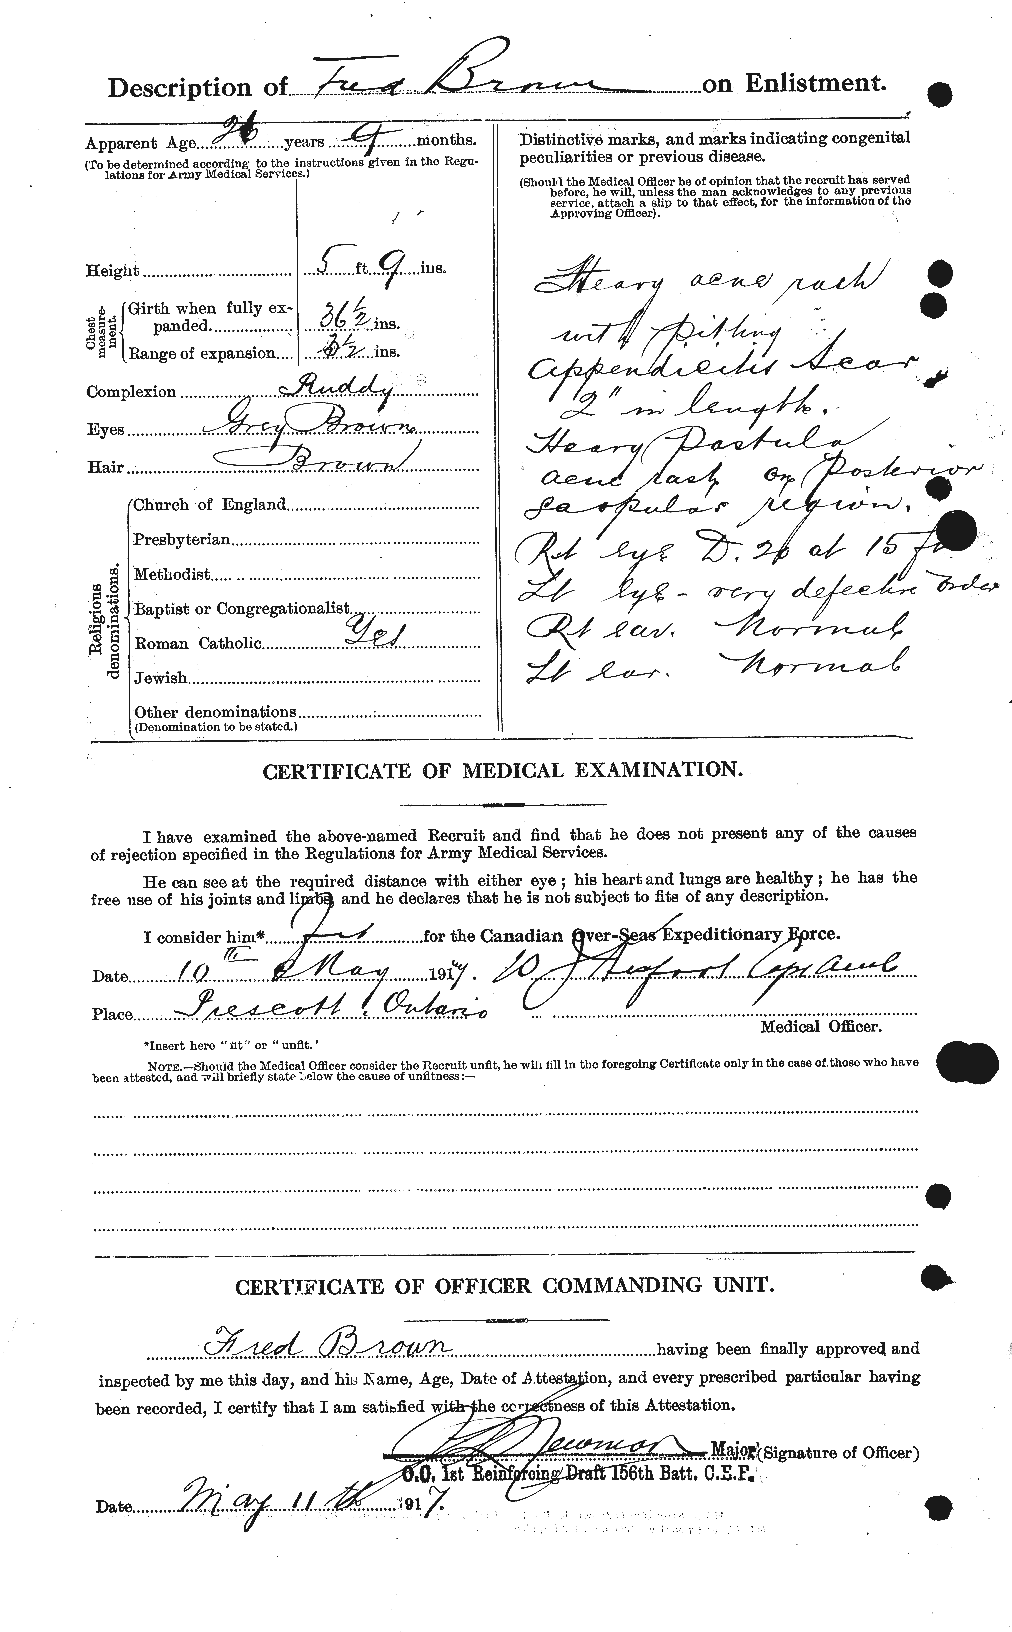 Personnel Records of the First World War - CEF 266169b